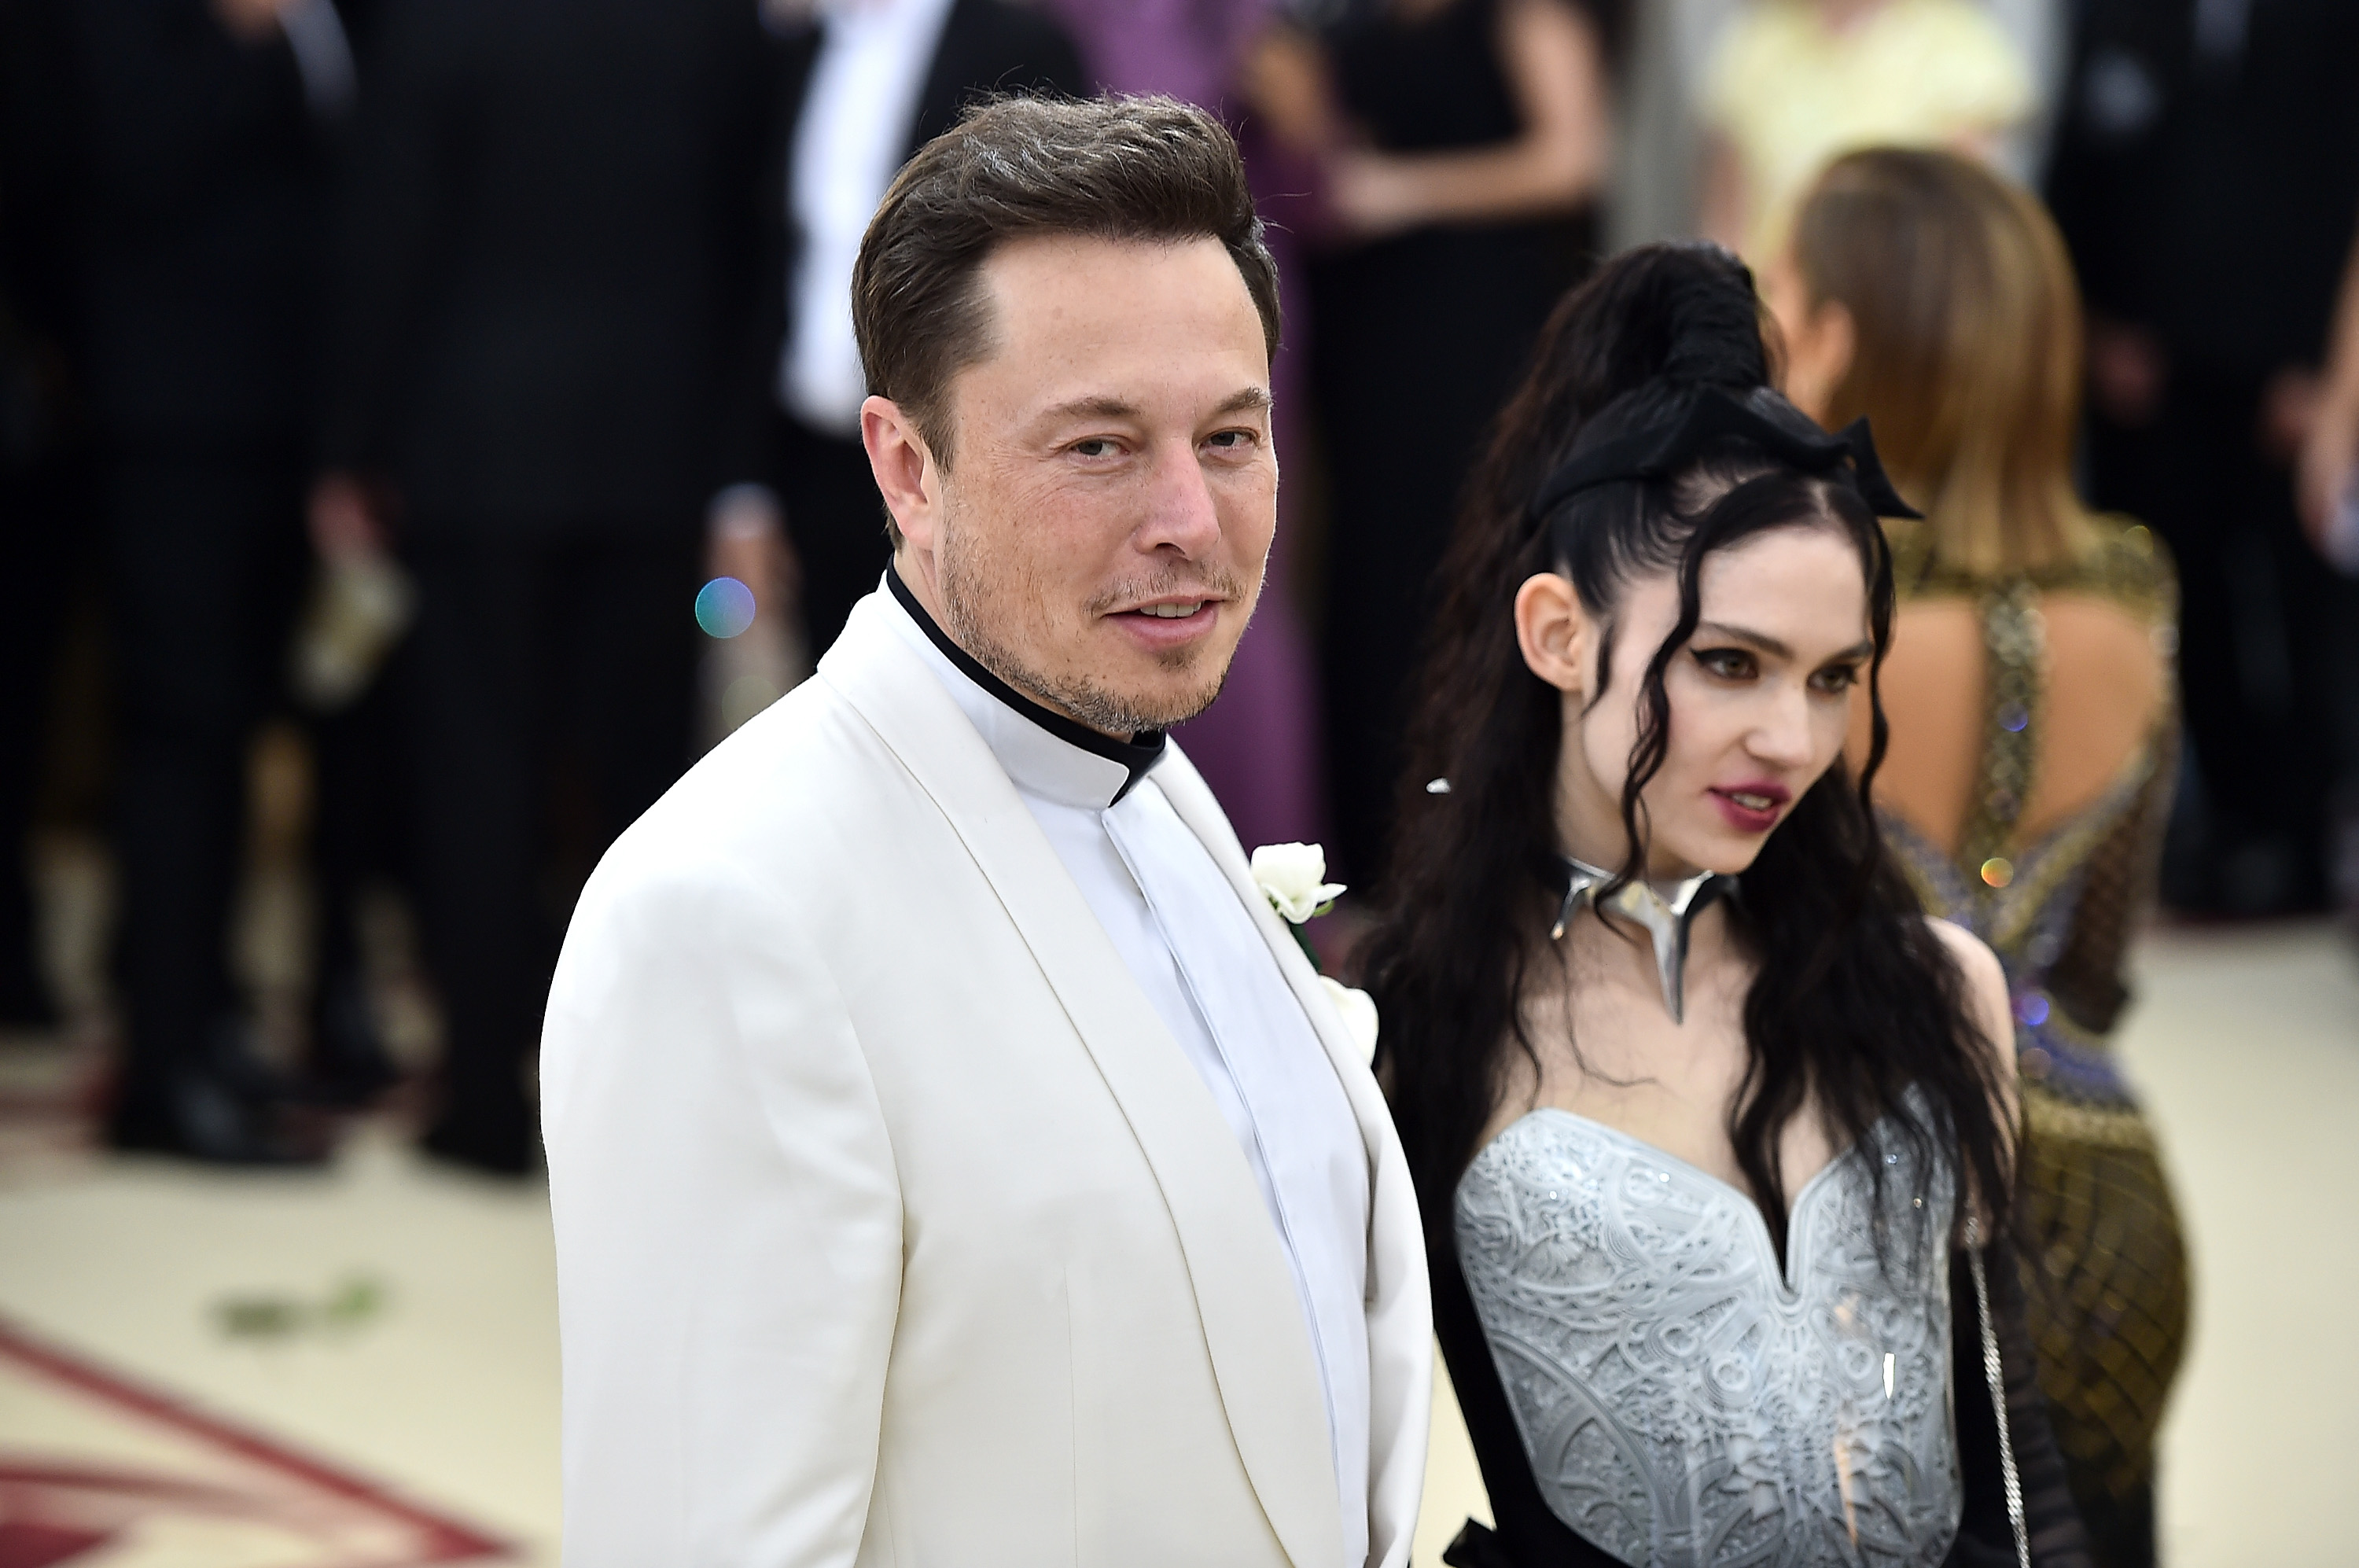 Elon Musk and Grimes at the 2018 MET Gala on May 7, 2018, in New York City. | Source: Getty Images